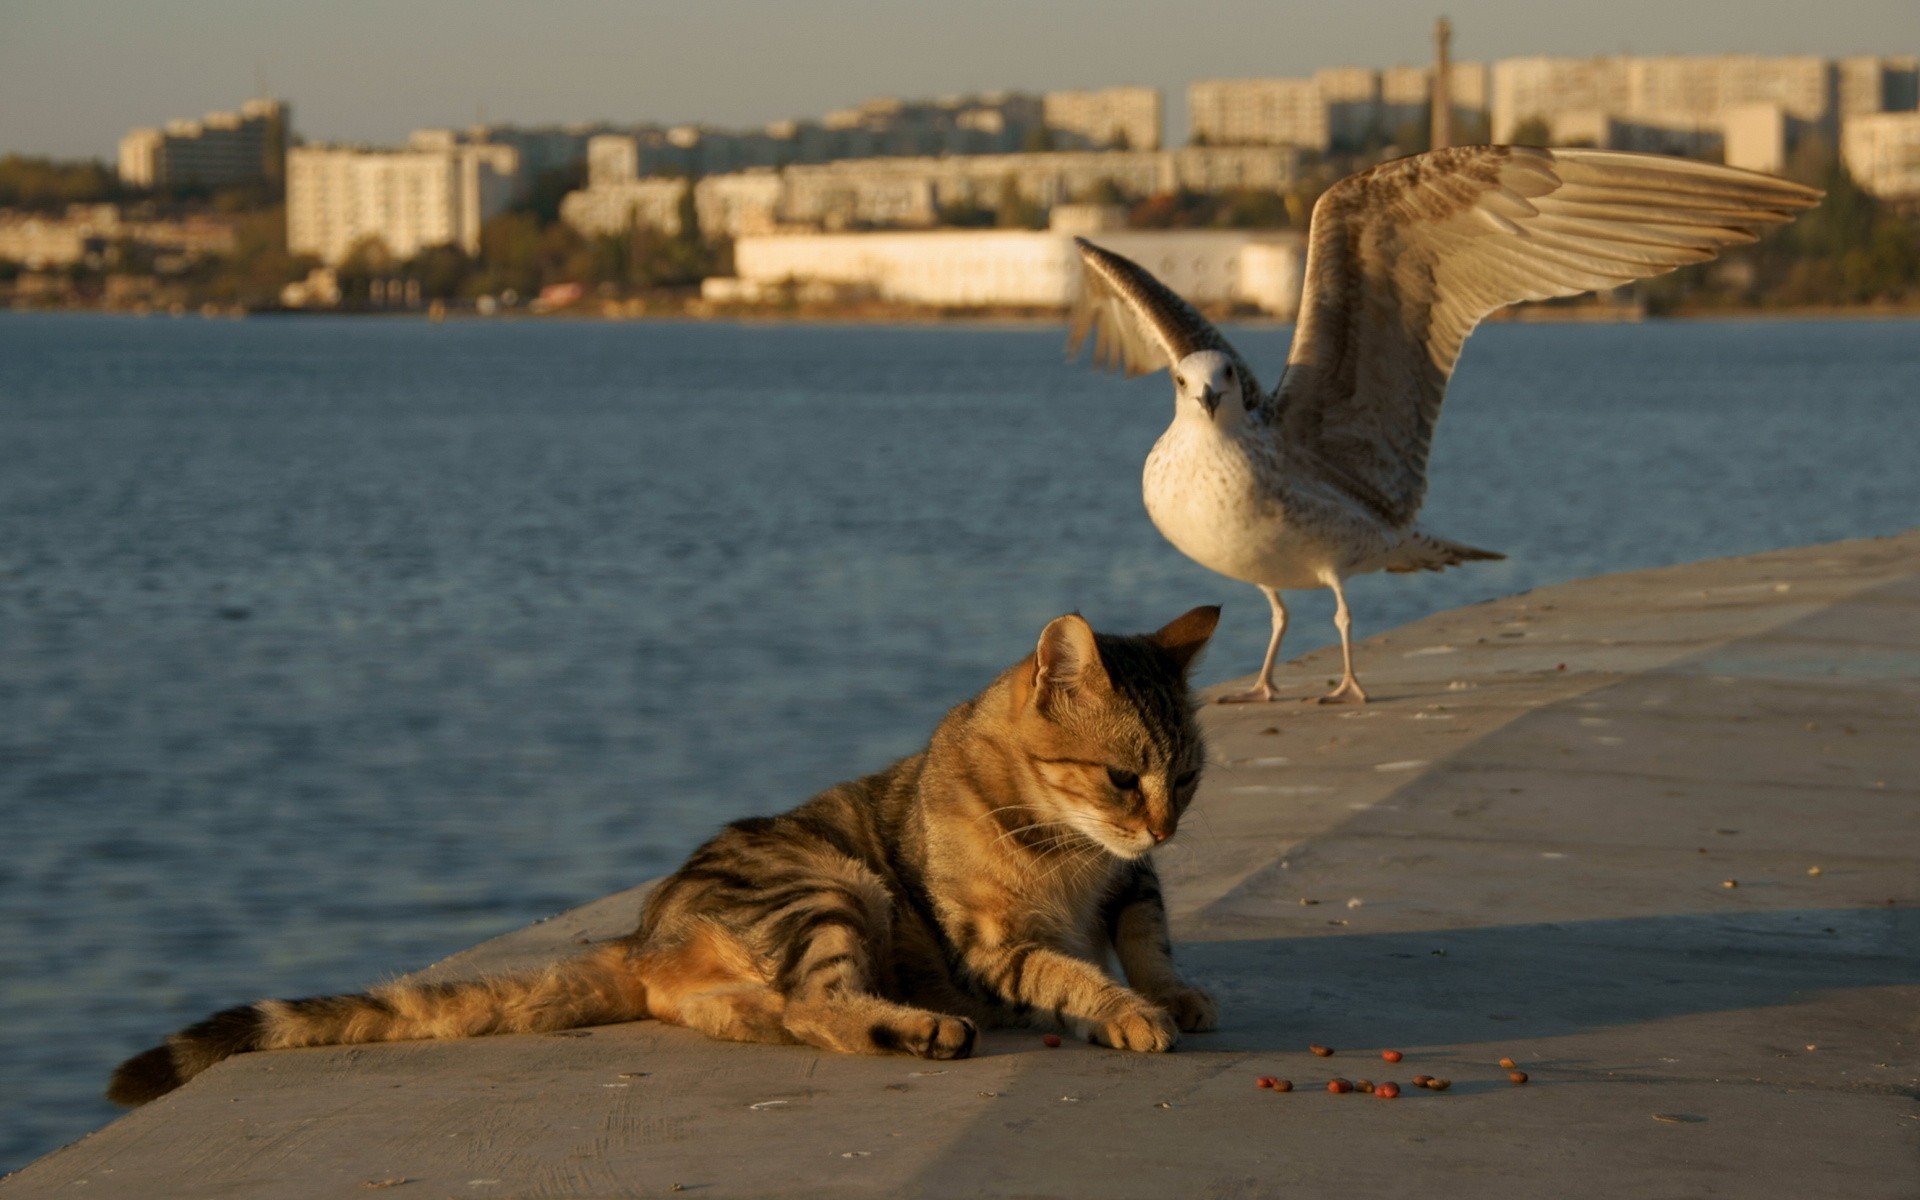 Seagull And The Cat On Shore Wallpaper Image